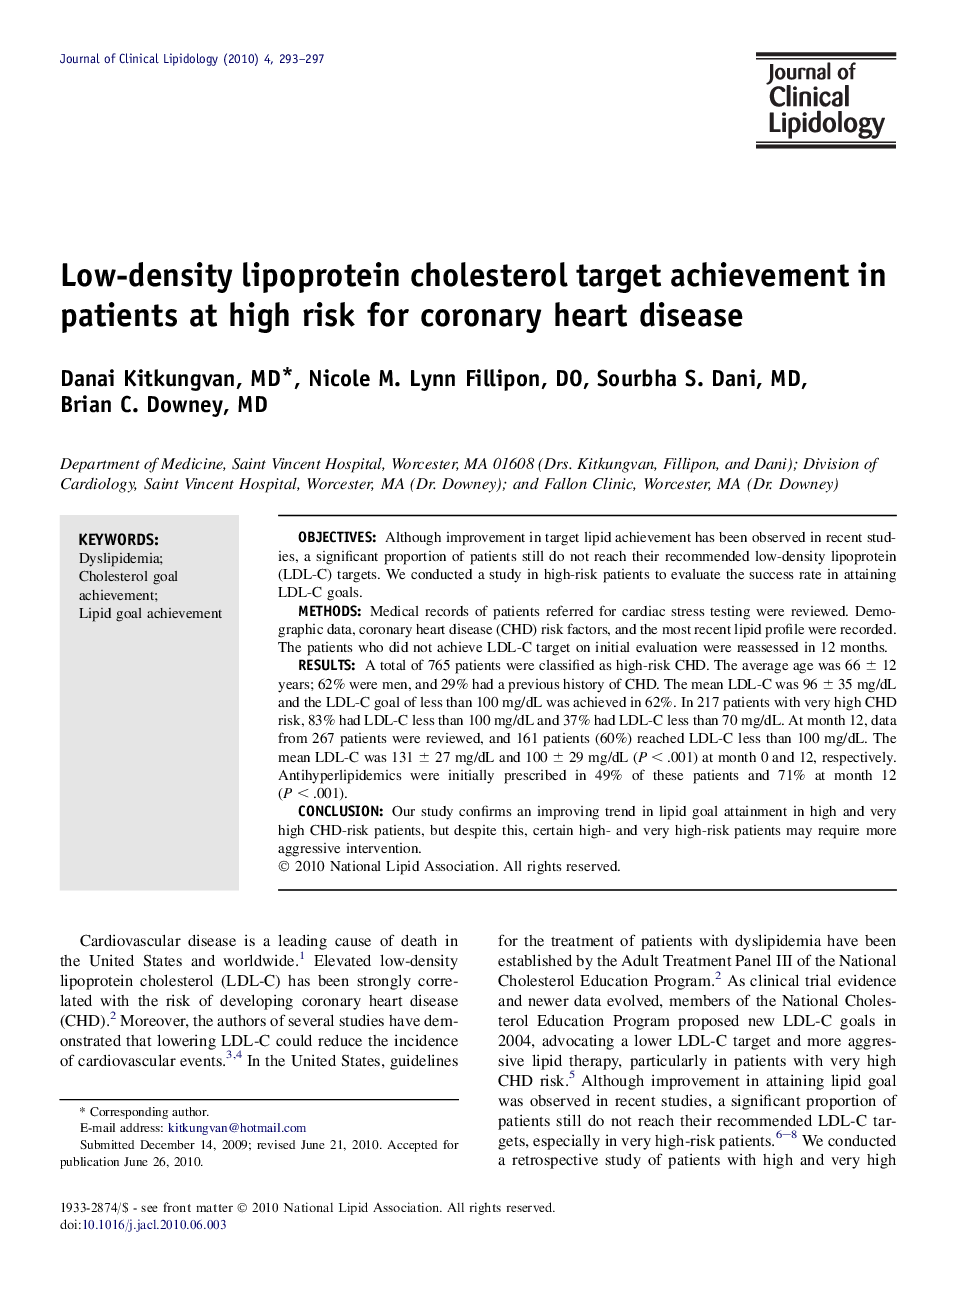 Low-density lipoprotein cholesterol target achievement in patients at high risk for coronary heart disease